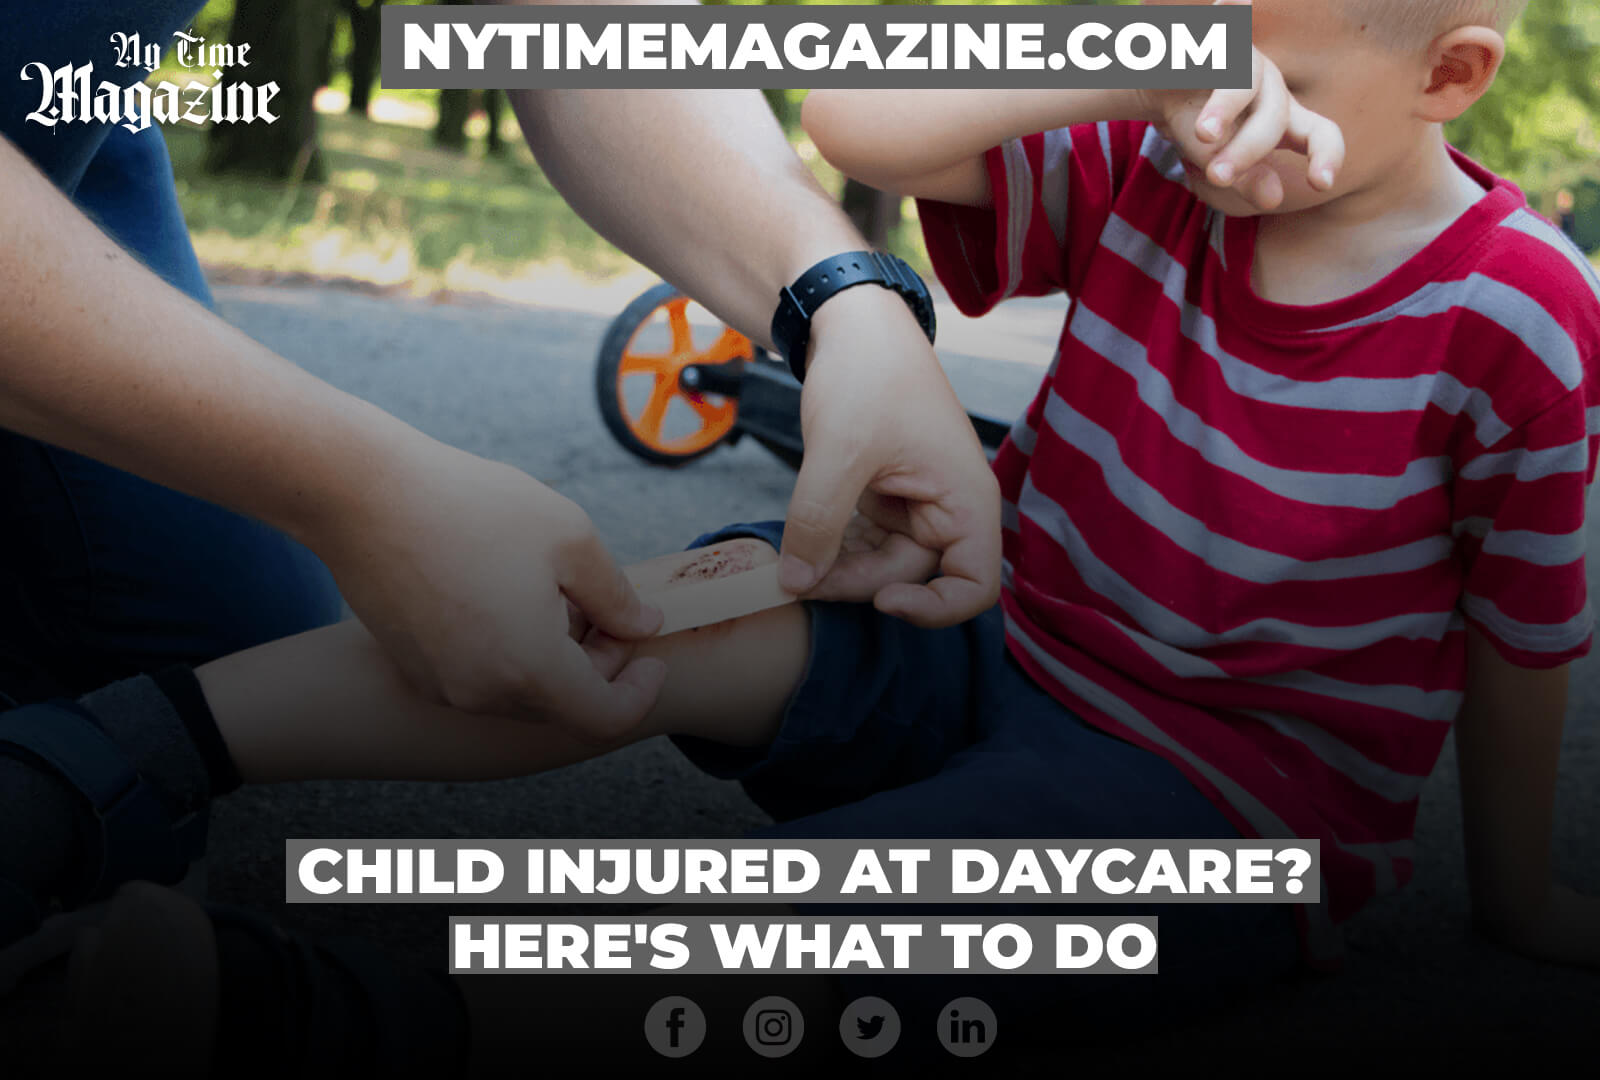 Child Injured at Daycare? Here's What To Do